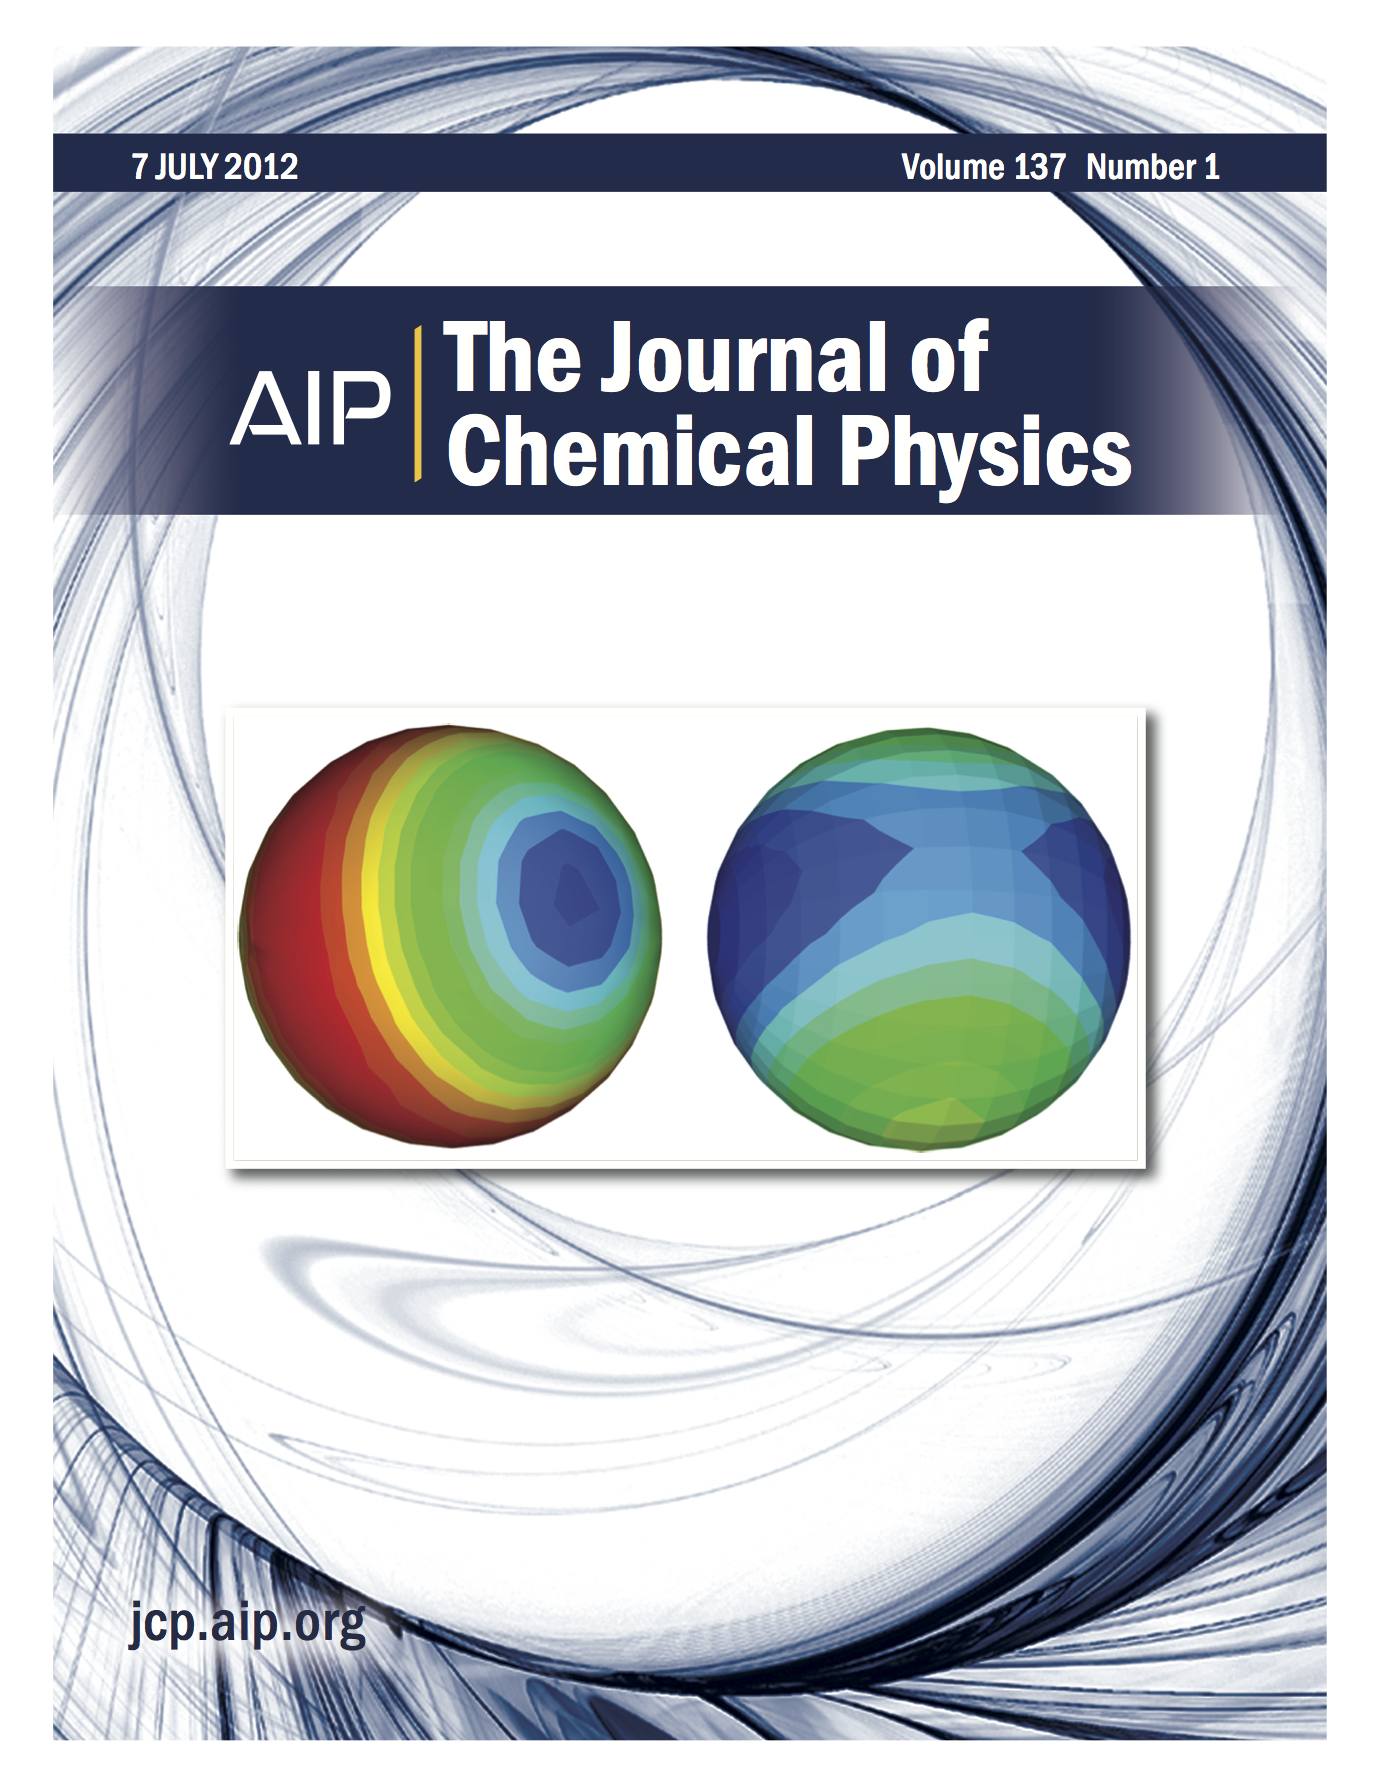 JCP 137 1 cover